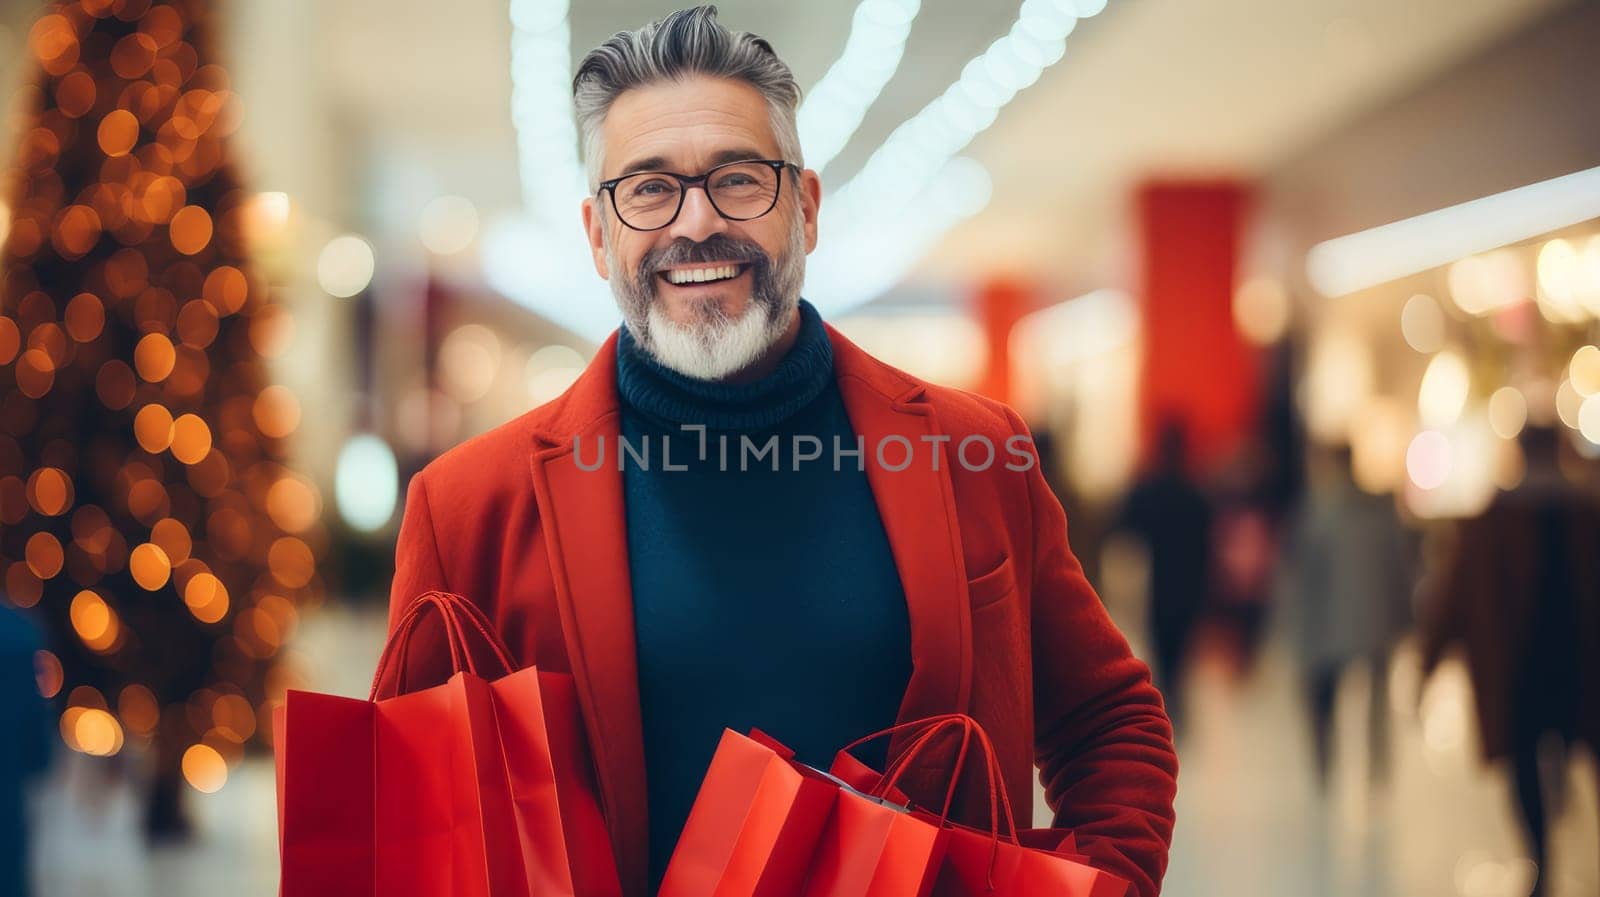 Smiling middle aged man with Christmas gifts in shopping bags in a shopping mall. Christmas sale concept.